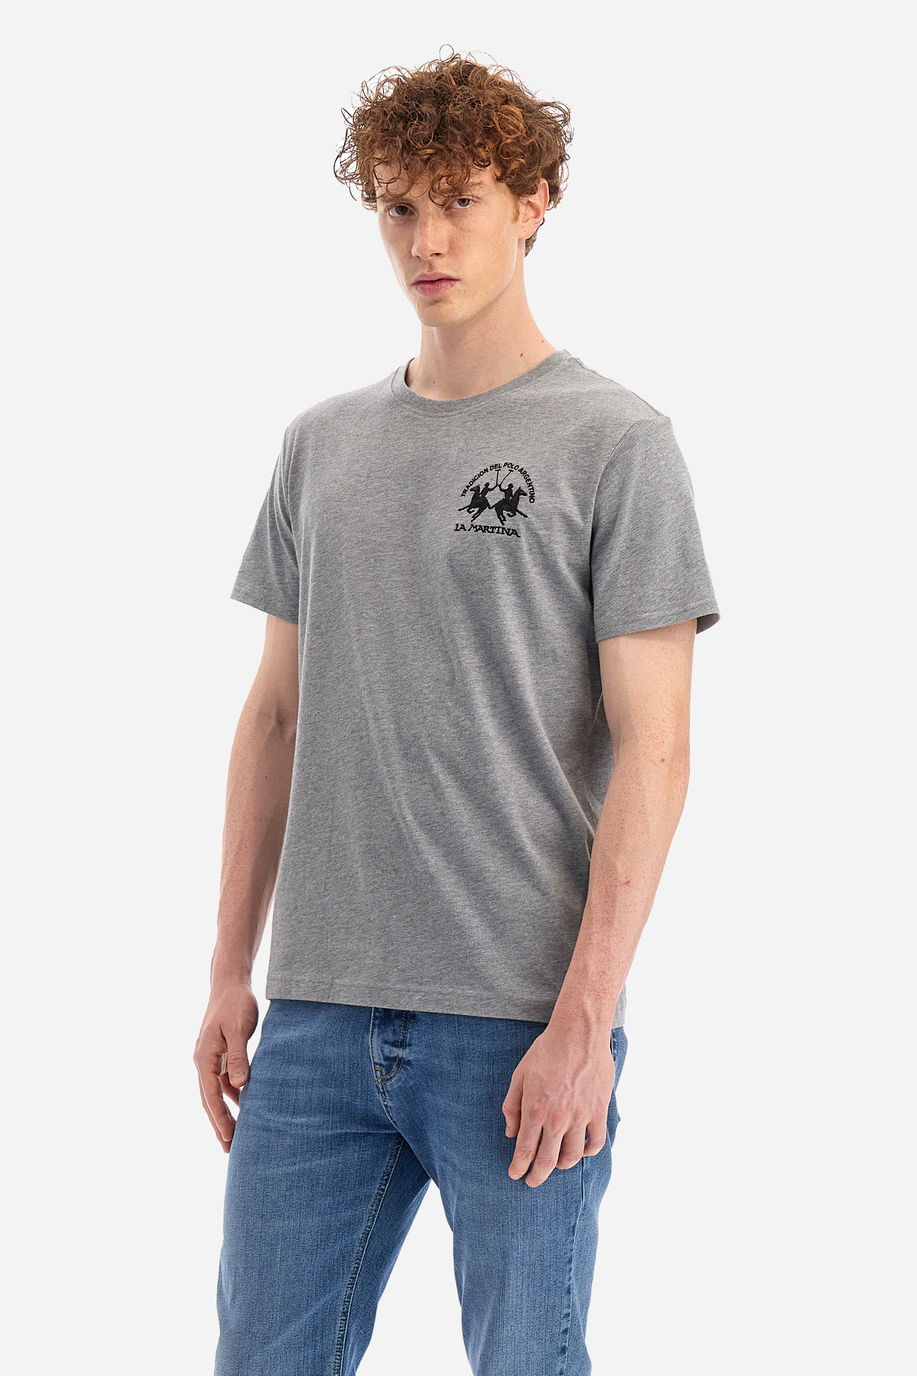 Men's T-shirts in a regular fit - Wandie - Gifts under €75 for him | La Martina - Official Online Shop